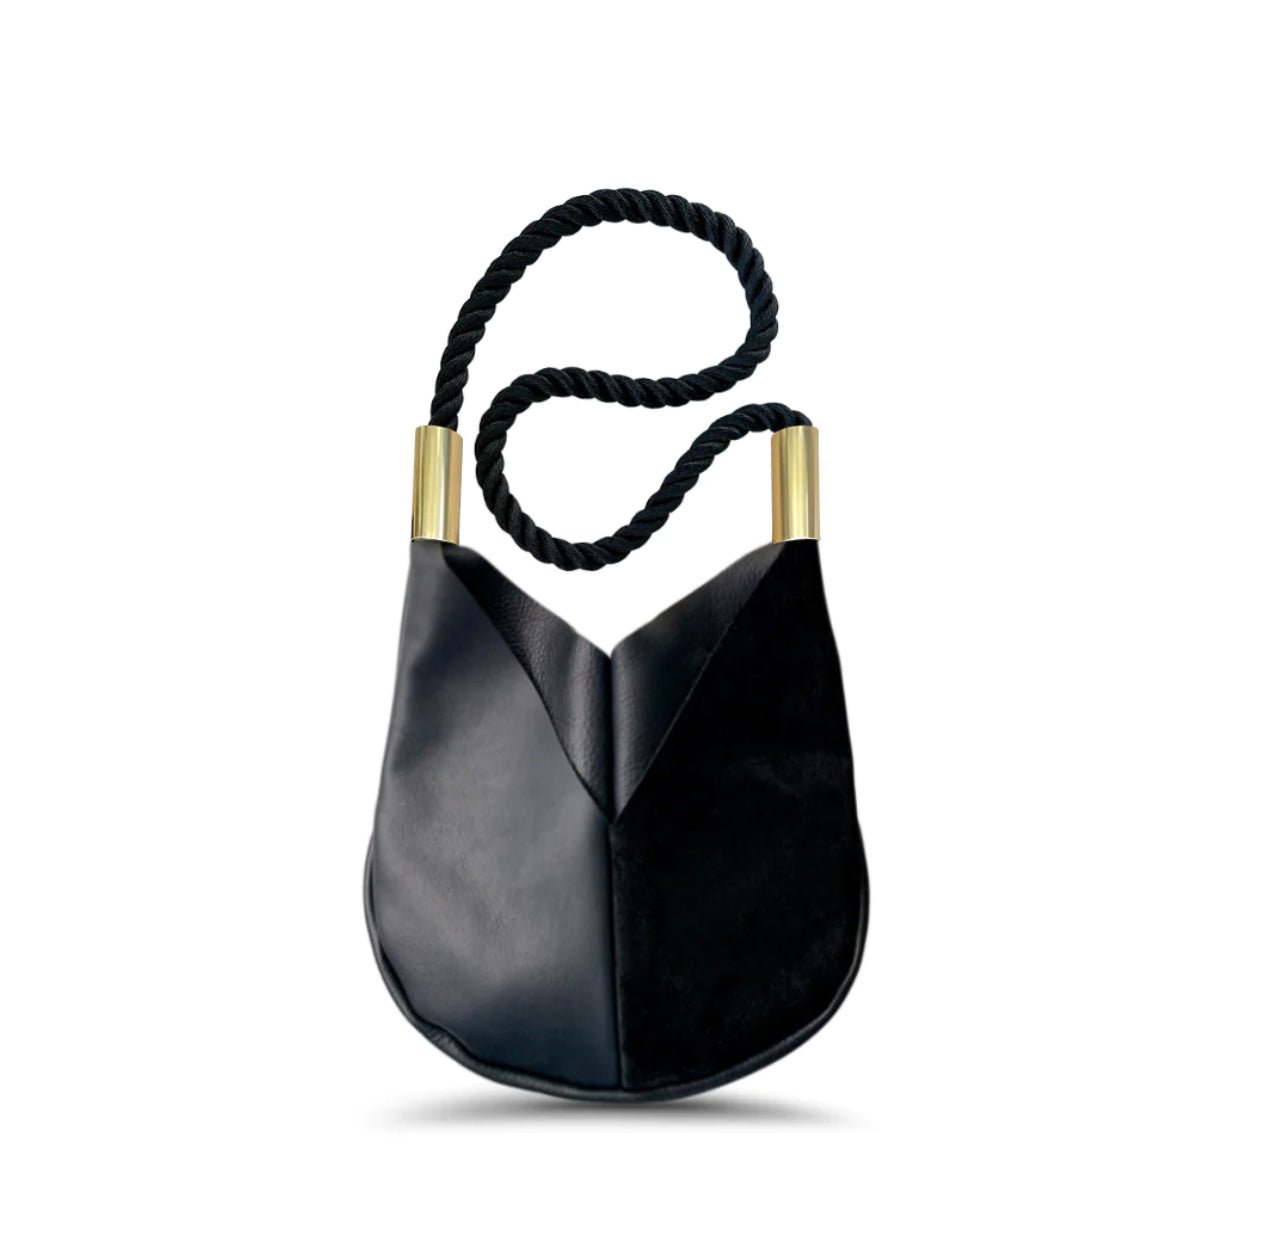 Black Leather Crossbody, Small Tote with Dock Line Rope Handle. Summer Night Black / Crossbody Tote / 18" Handle - Abigail Fox Designs